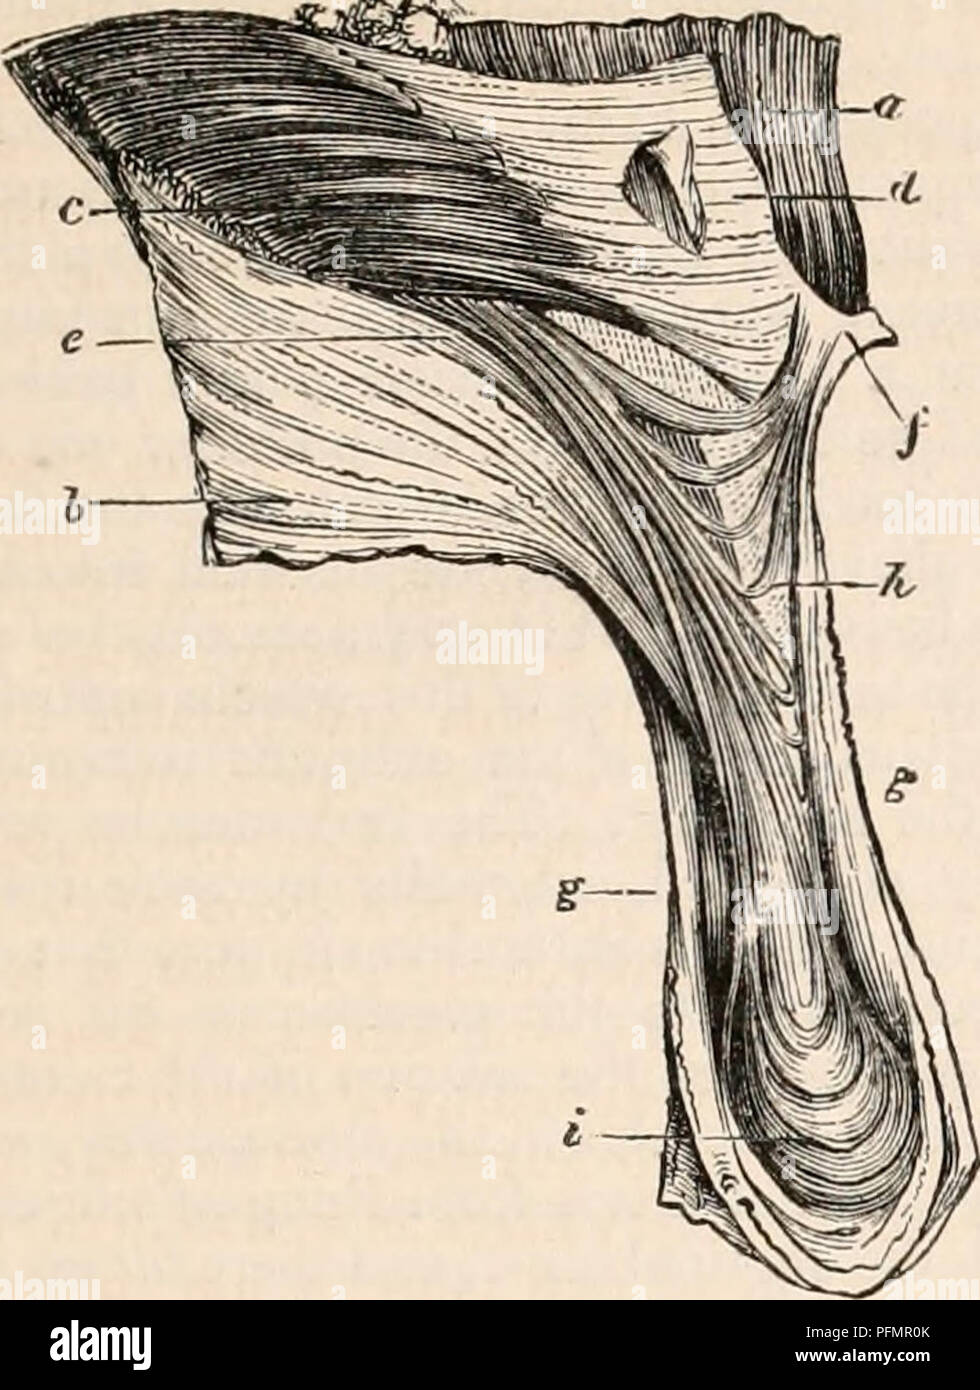 . The cyclopædia of anatomy and physiology. Anatomy; Physiology; Zoology. ABDOMEN. Fig. 3.. c, the internal oblique ; e, the descending fibres; /, point of insertion into the pubis ; h, one of the re- versed arches; d, conjoined tendons; a, rectus muscle. good deal diminished in size, crosses over the inferior and anterior portion of the tunica vagi- nalis testis, and begins to ascend along the inner side of the testicle and cord, keeping more pos- teriorly : this constitutes the second bundle; it gradually increases in size as it ascends by re- ceiving the transverse fibres from the bundle of Stock Photo